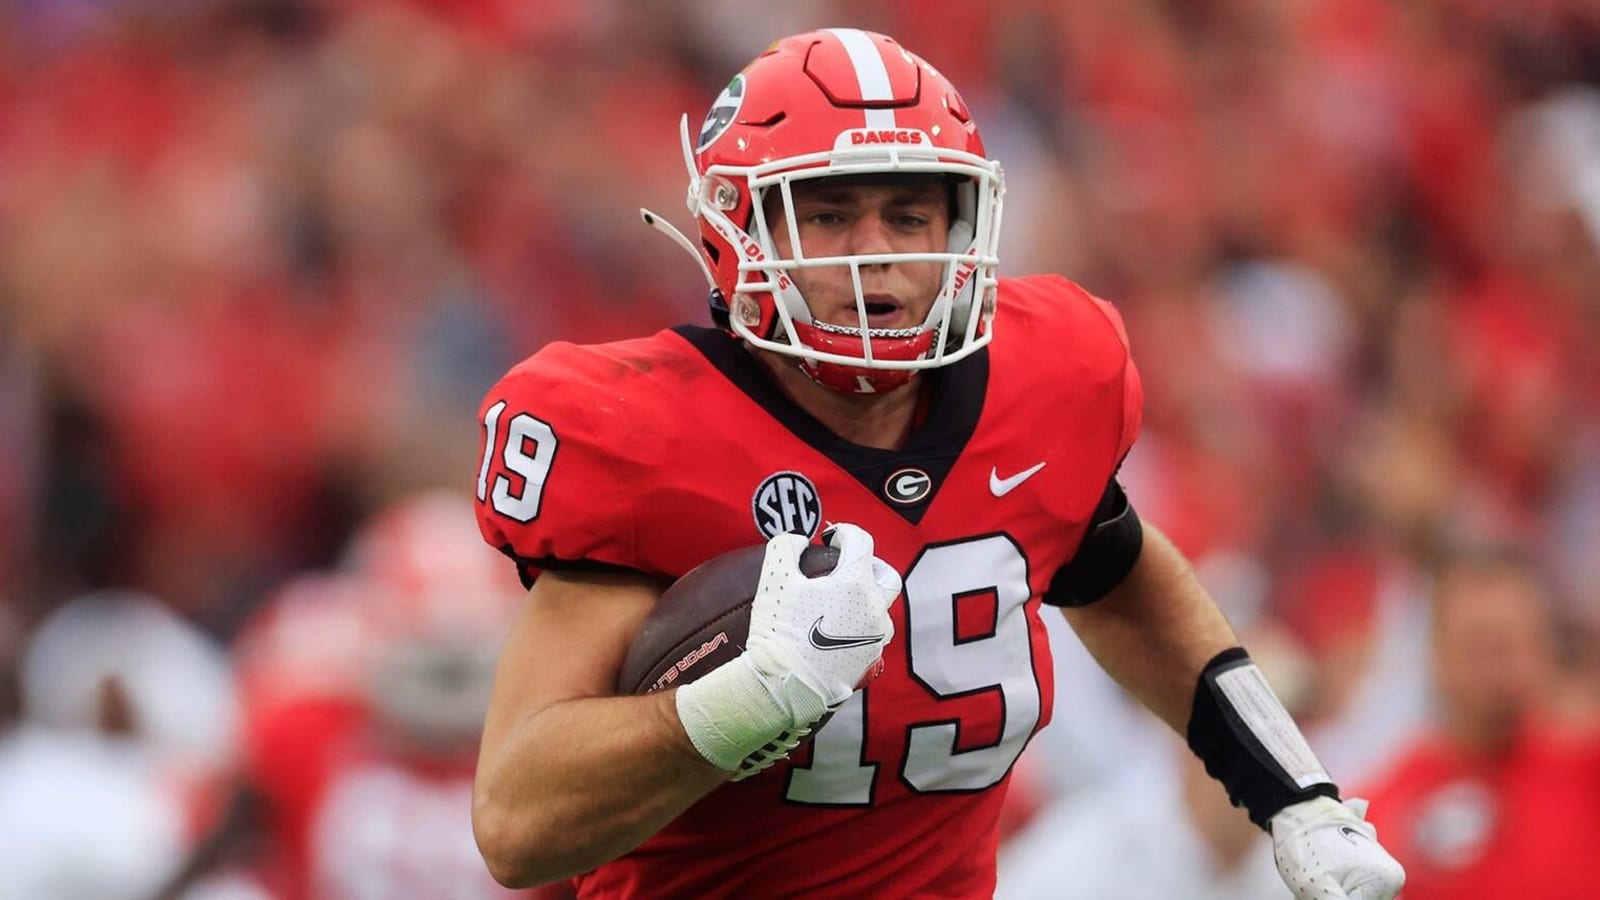 How this fabulous NFL prospect compares to Gronk